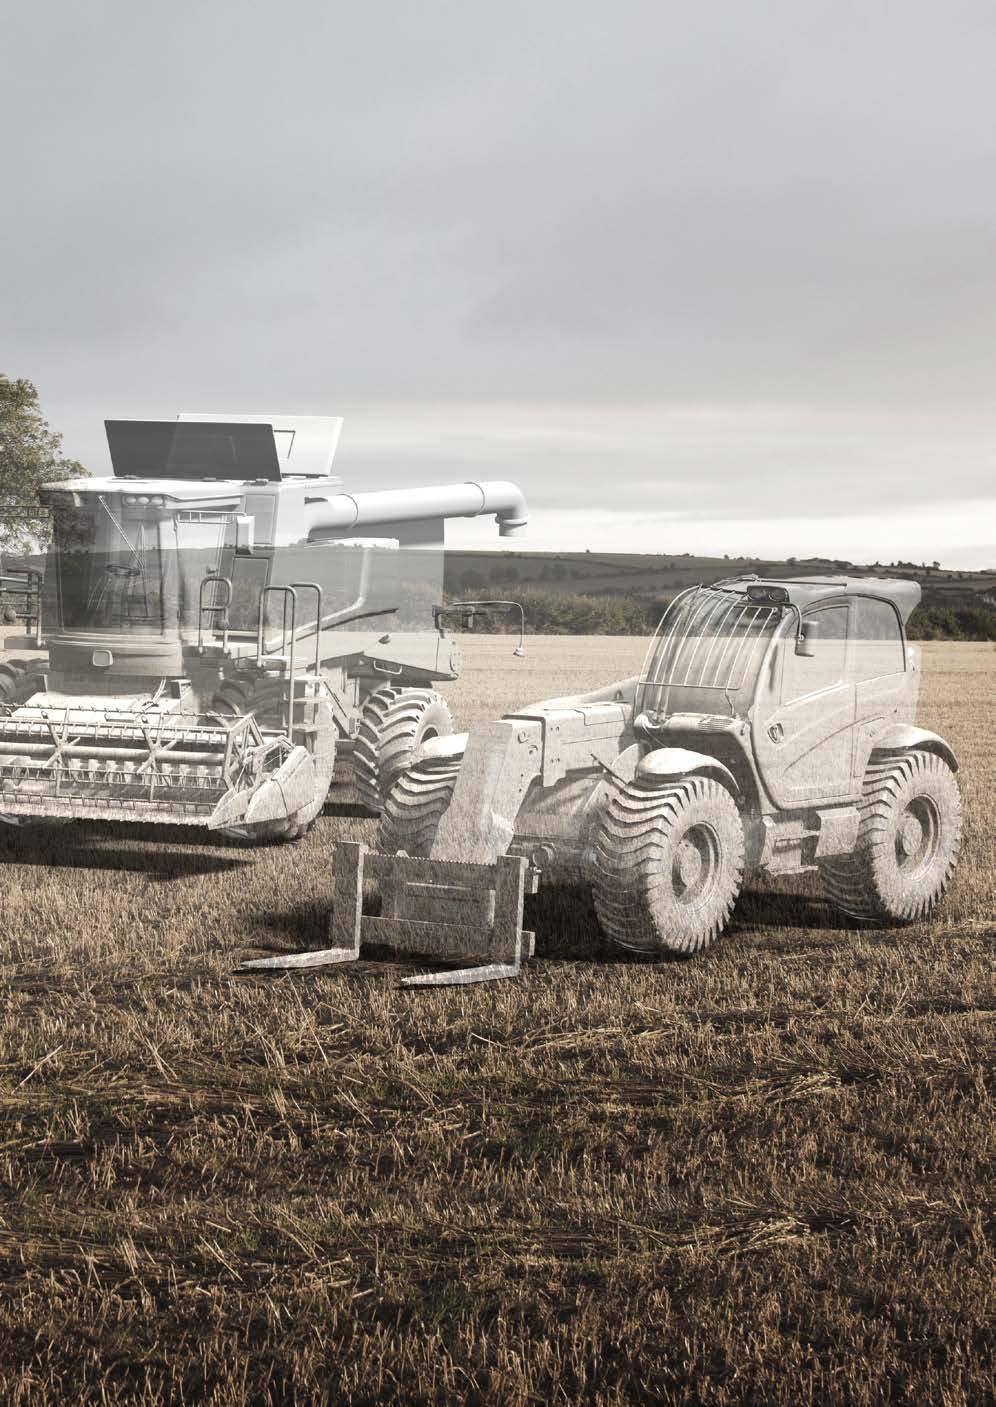 Brands Spicer drivetrain systems, including agricultural axle options, wheel and track drives, and hydrostatic transmissions, improve performance and efficiency as vehicles travel between and within